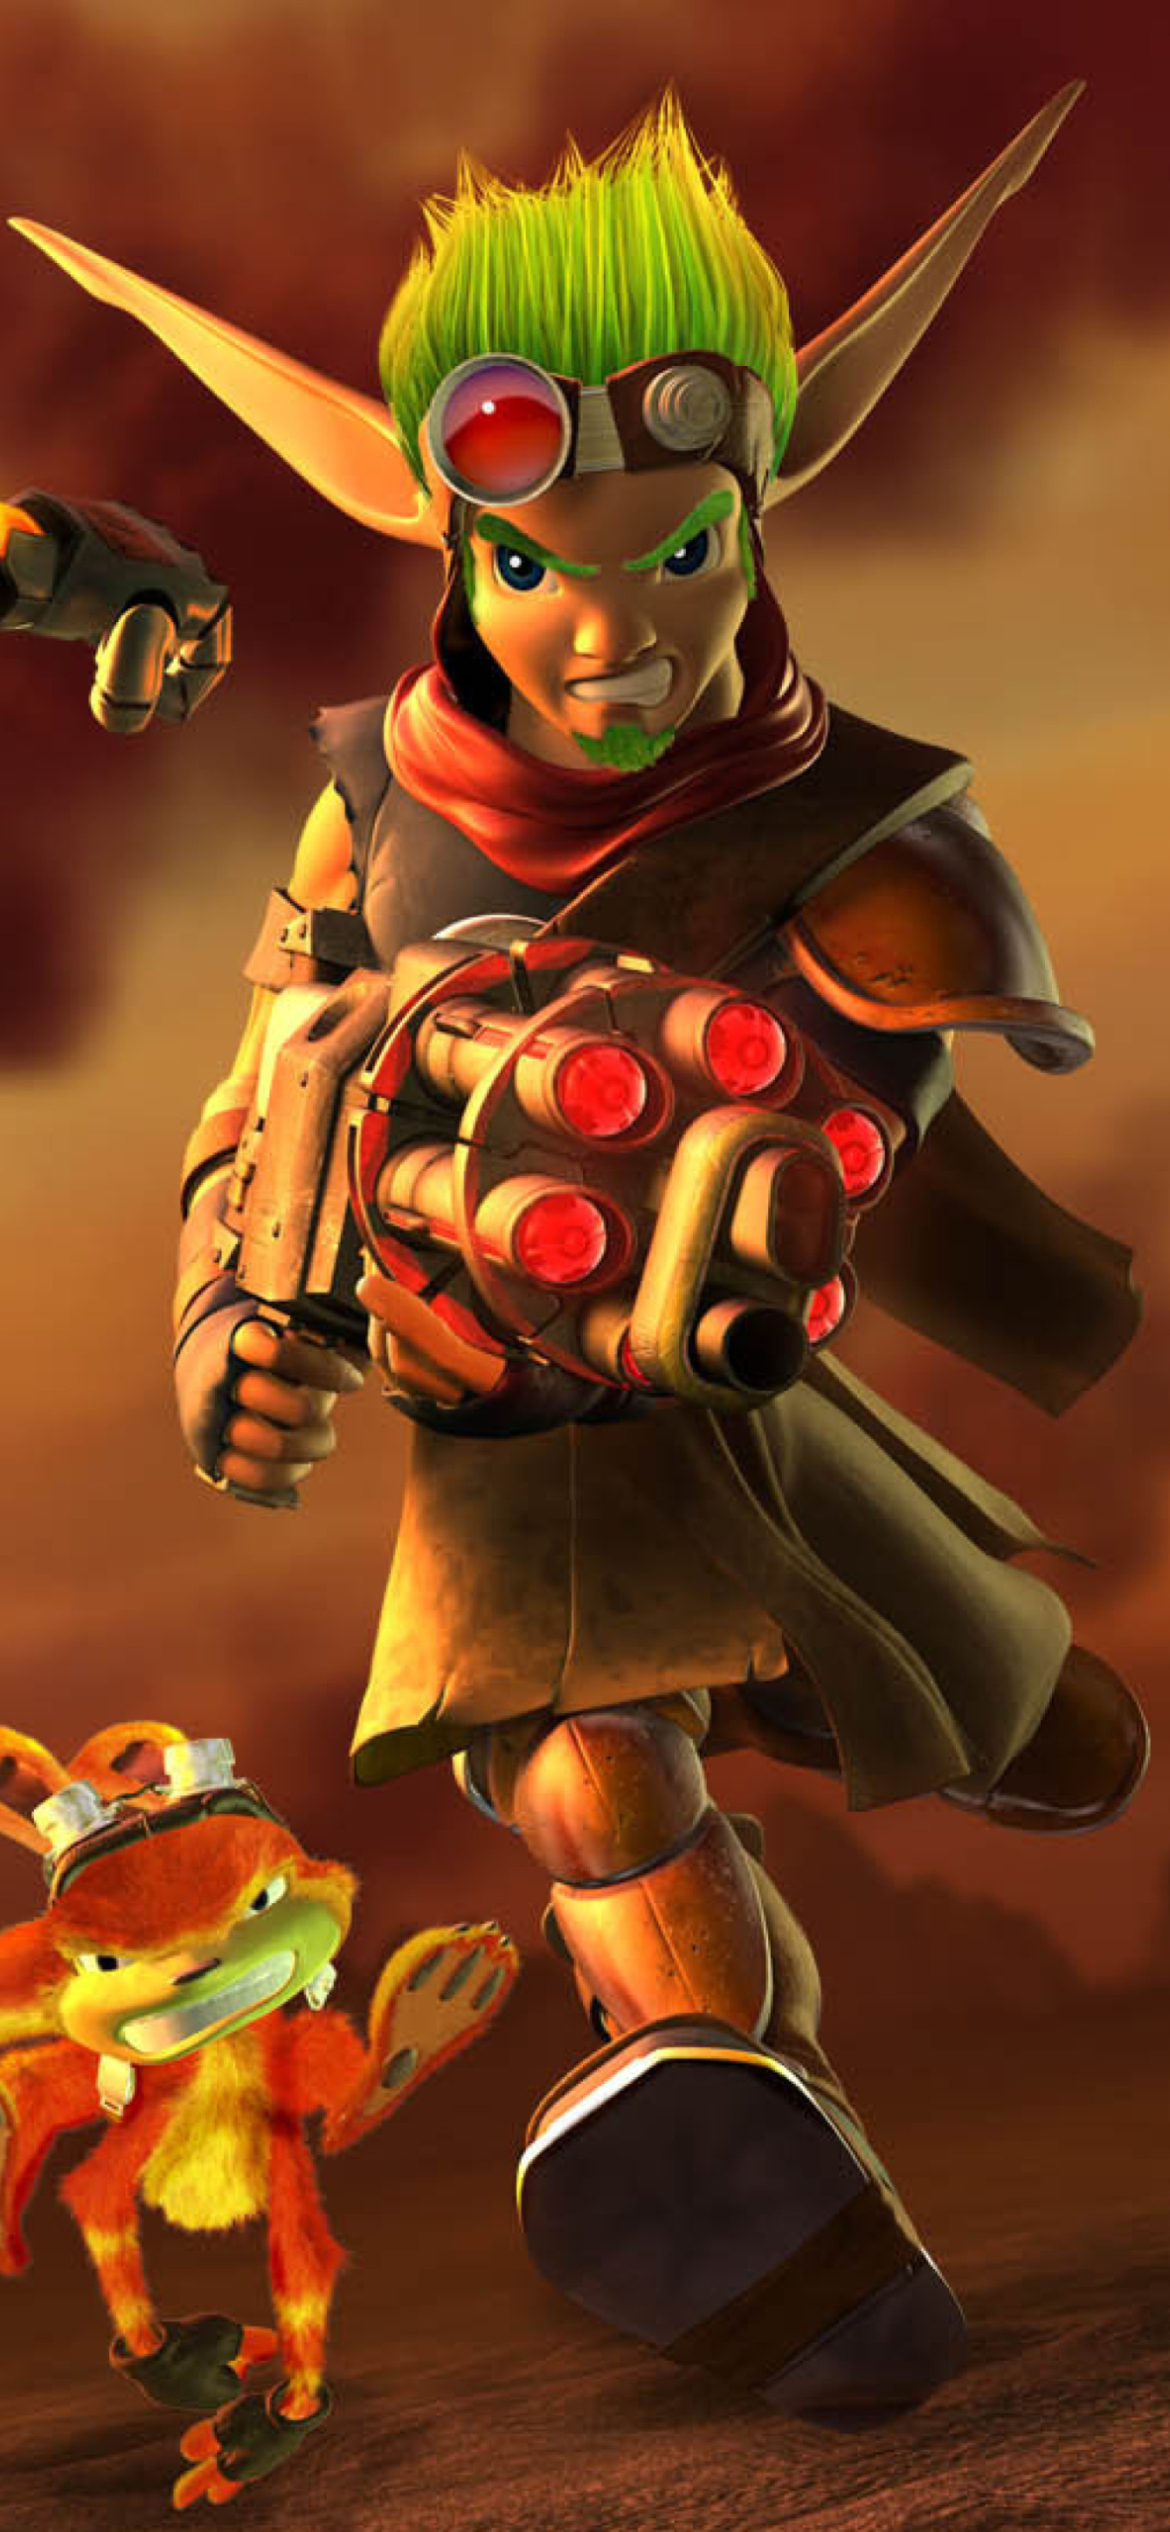 Das Jak and Daxter - Ratchet and Clank Wallpaper 1170x2532